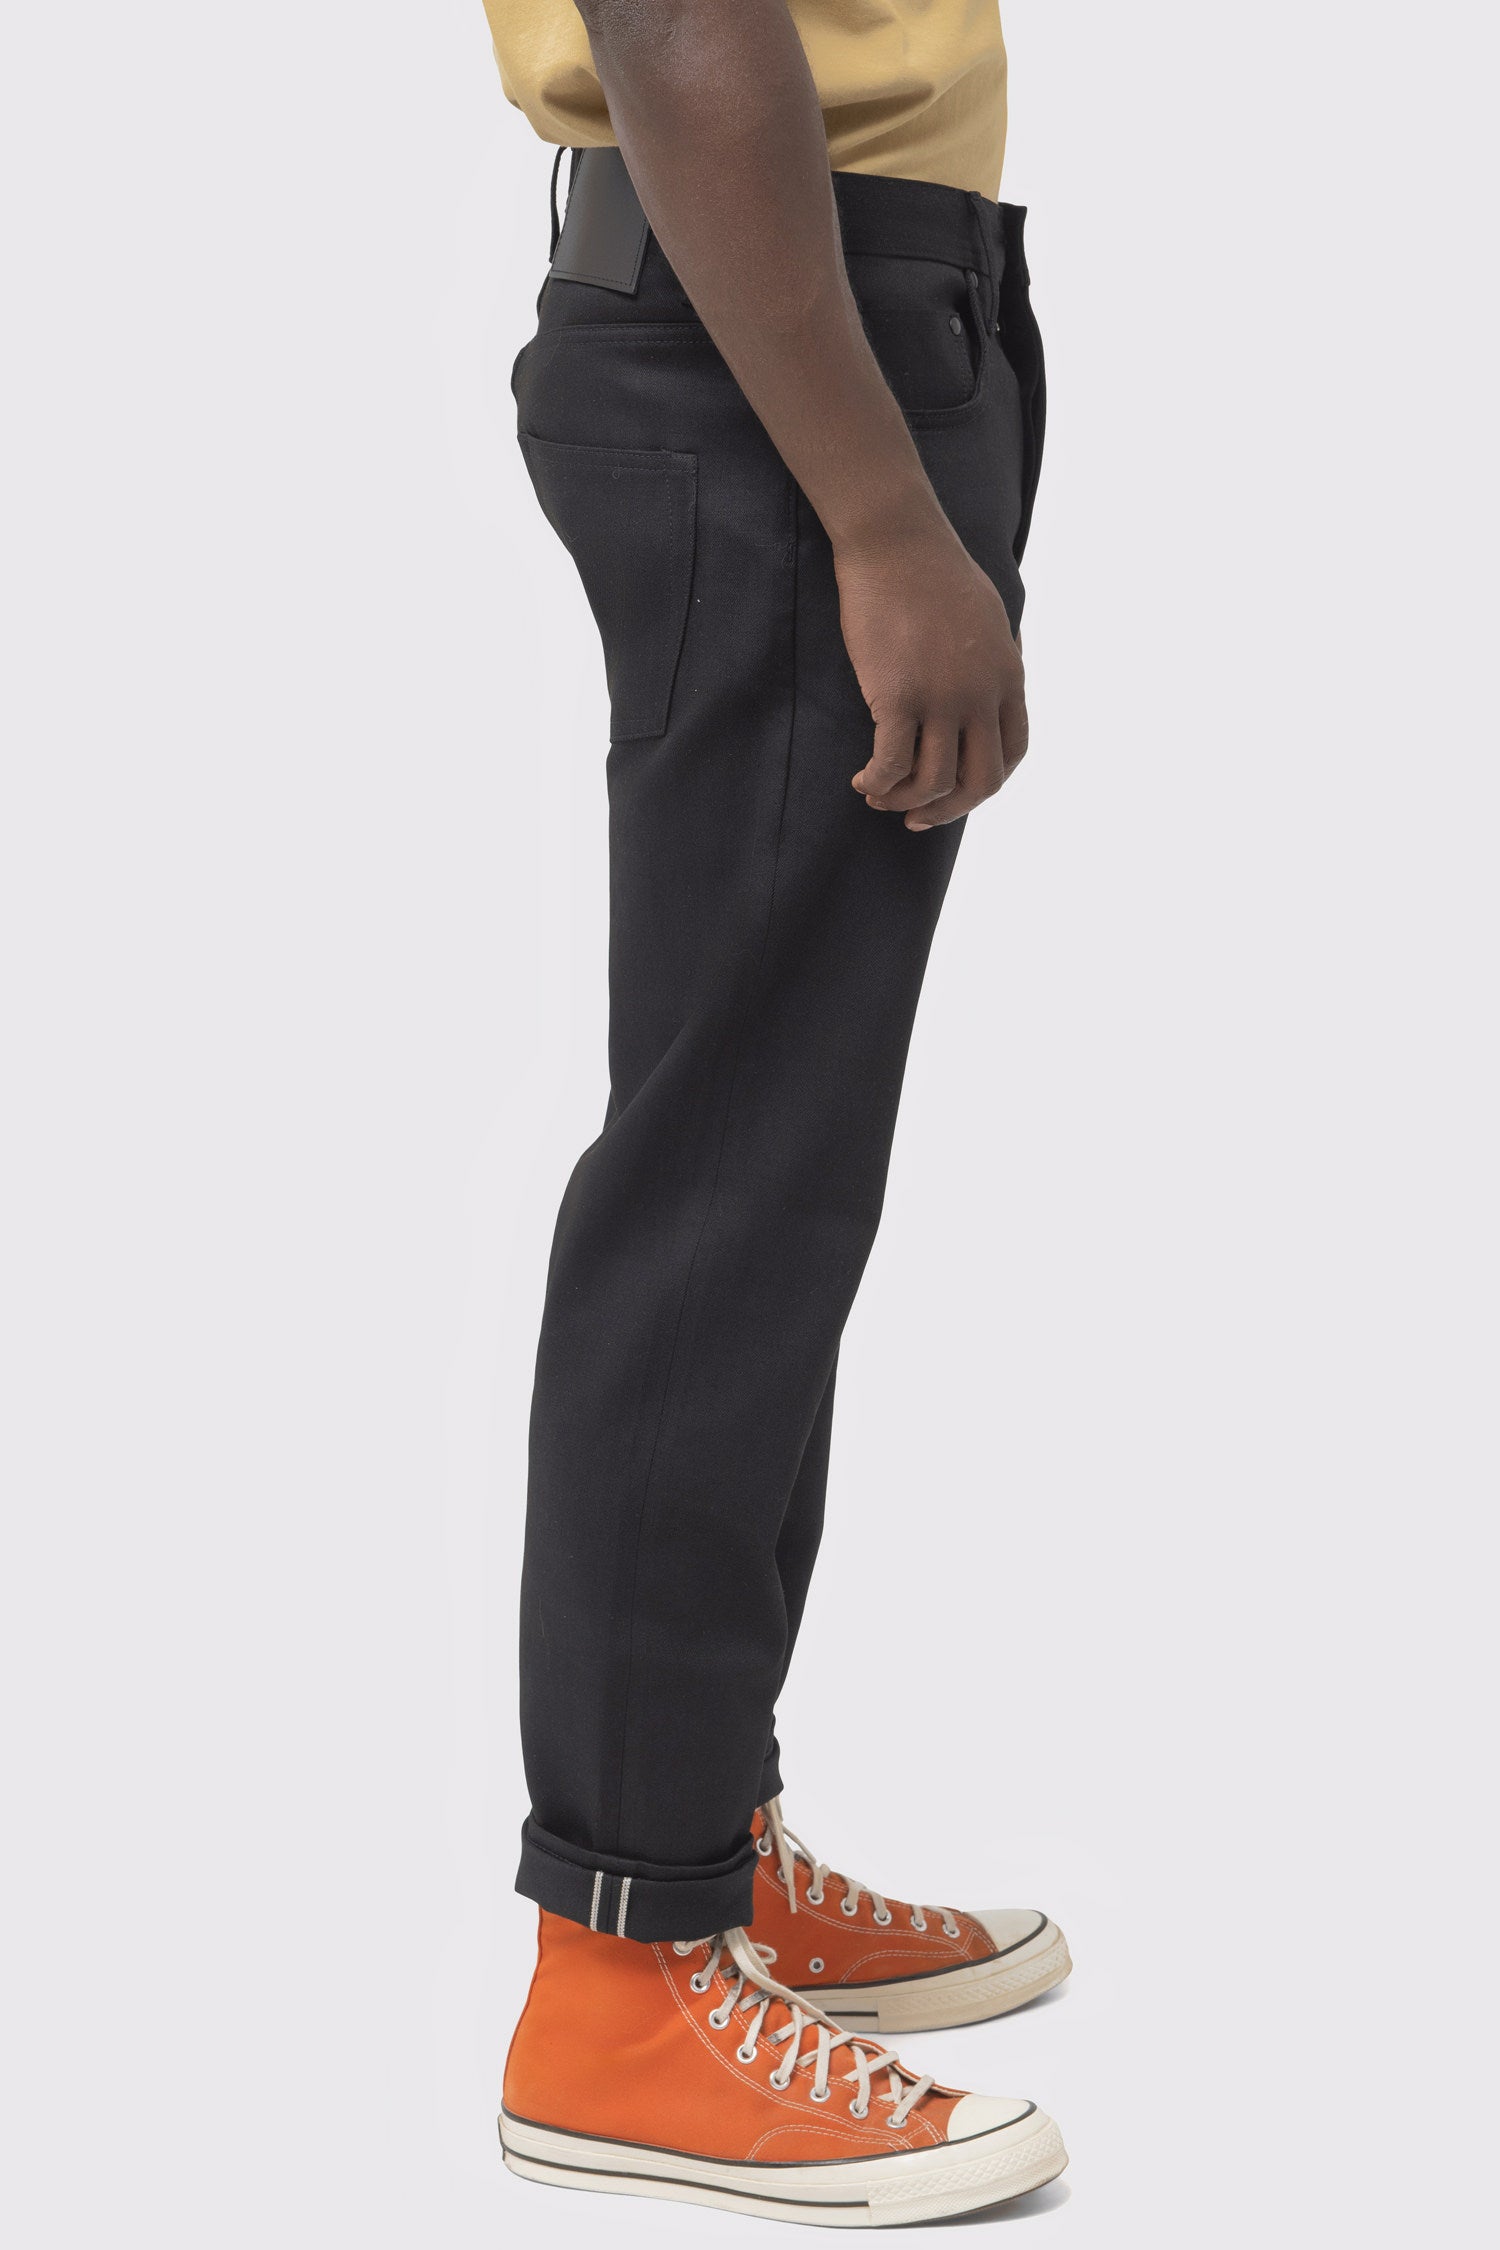 Men's Unbranded Relaxed Taper Fit Black Stretch Selvedge